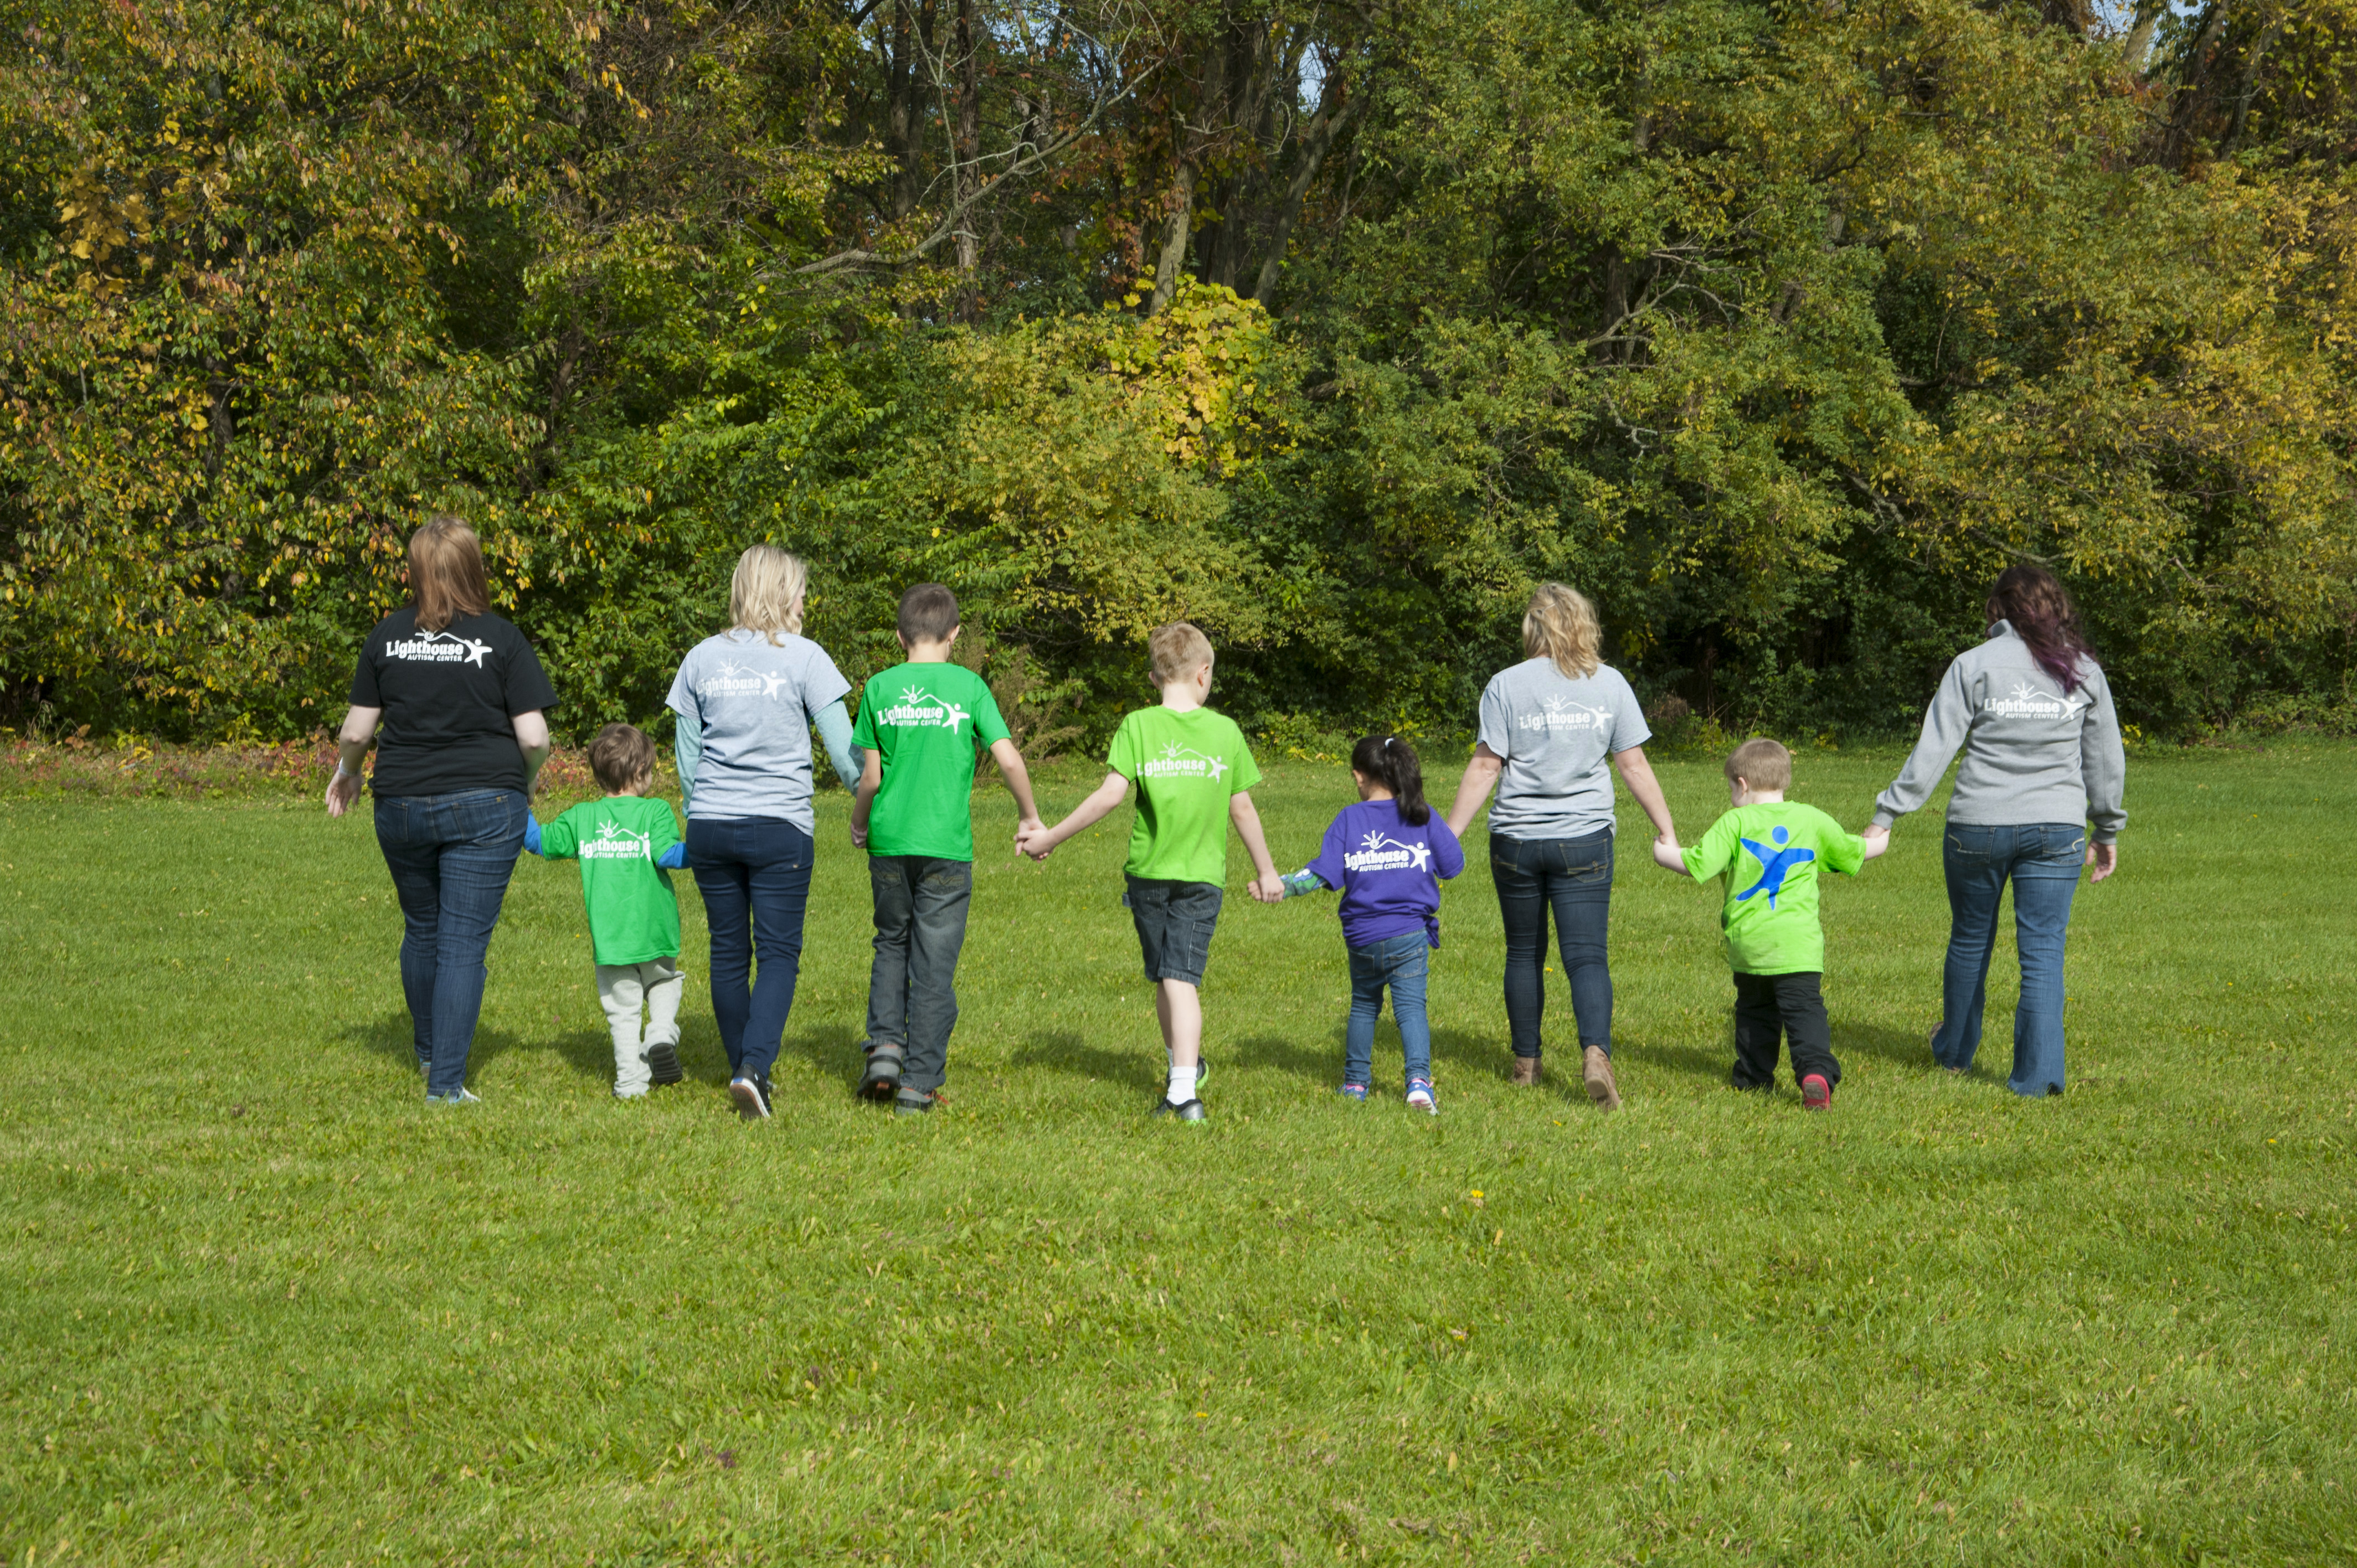 Four Lighthouse Autism Center staff members holding hands in a line with children in branded t-shirts on the grass facing trees